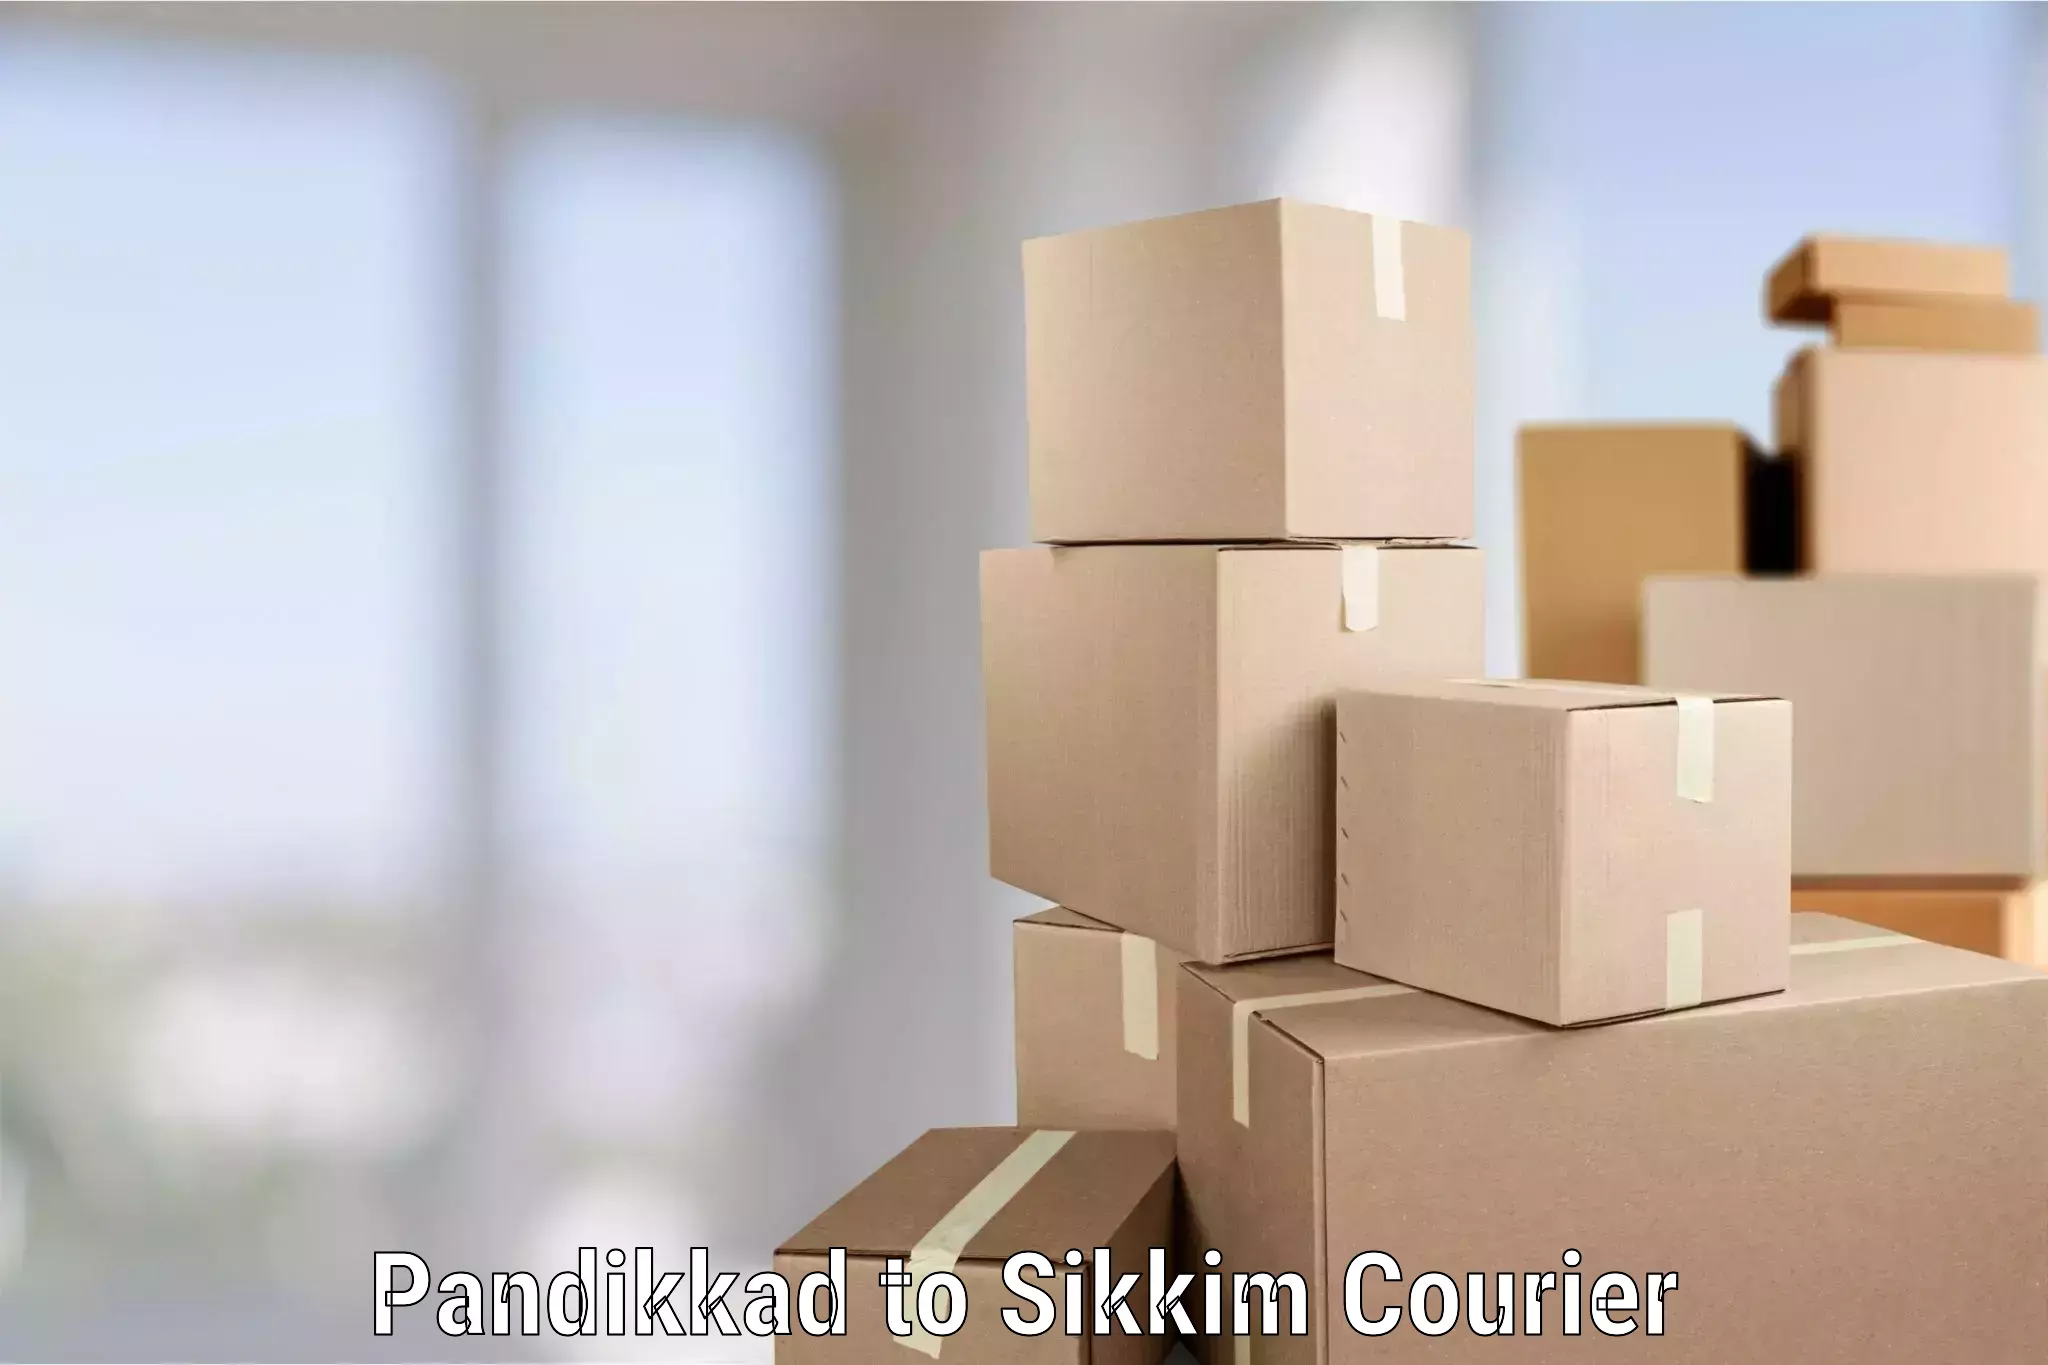 Moving and packing experts Pandikkad to Sikkim